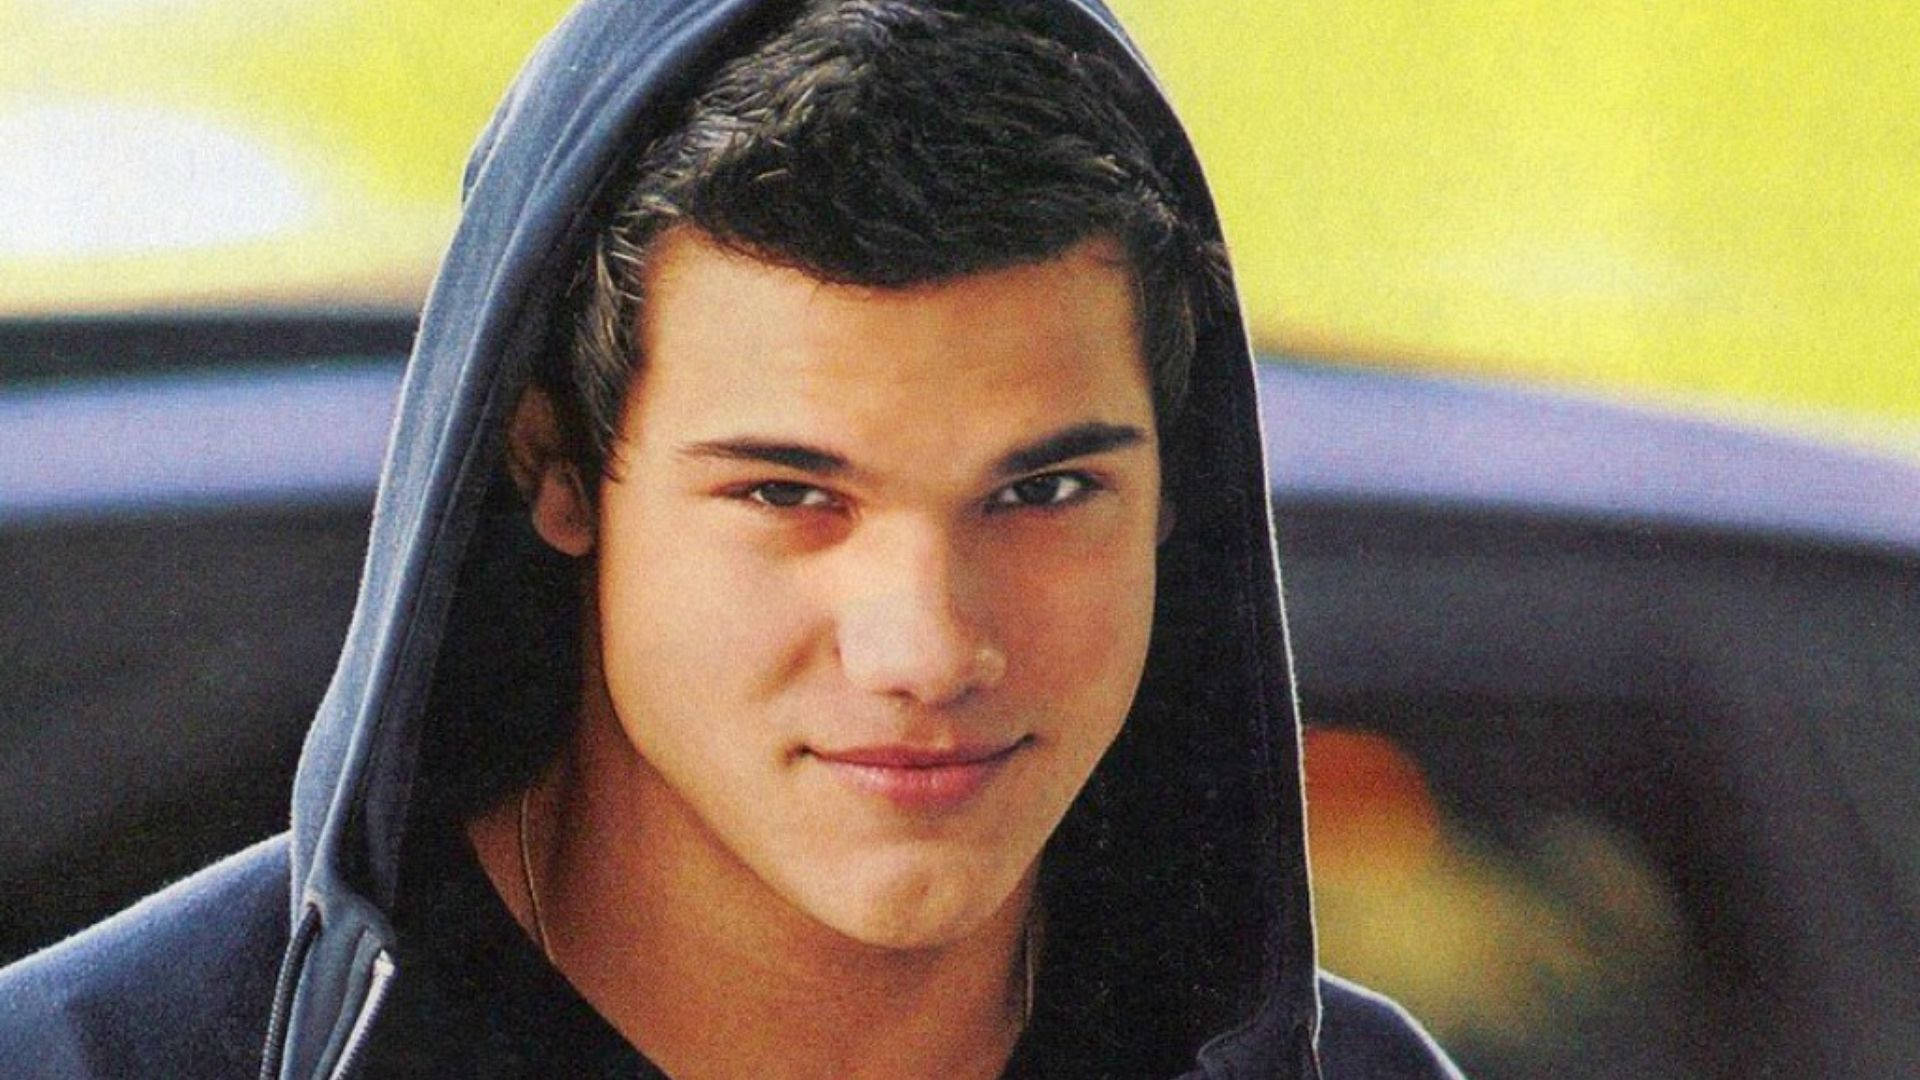 Taylor Lautner Smiling Cutely Background